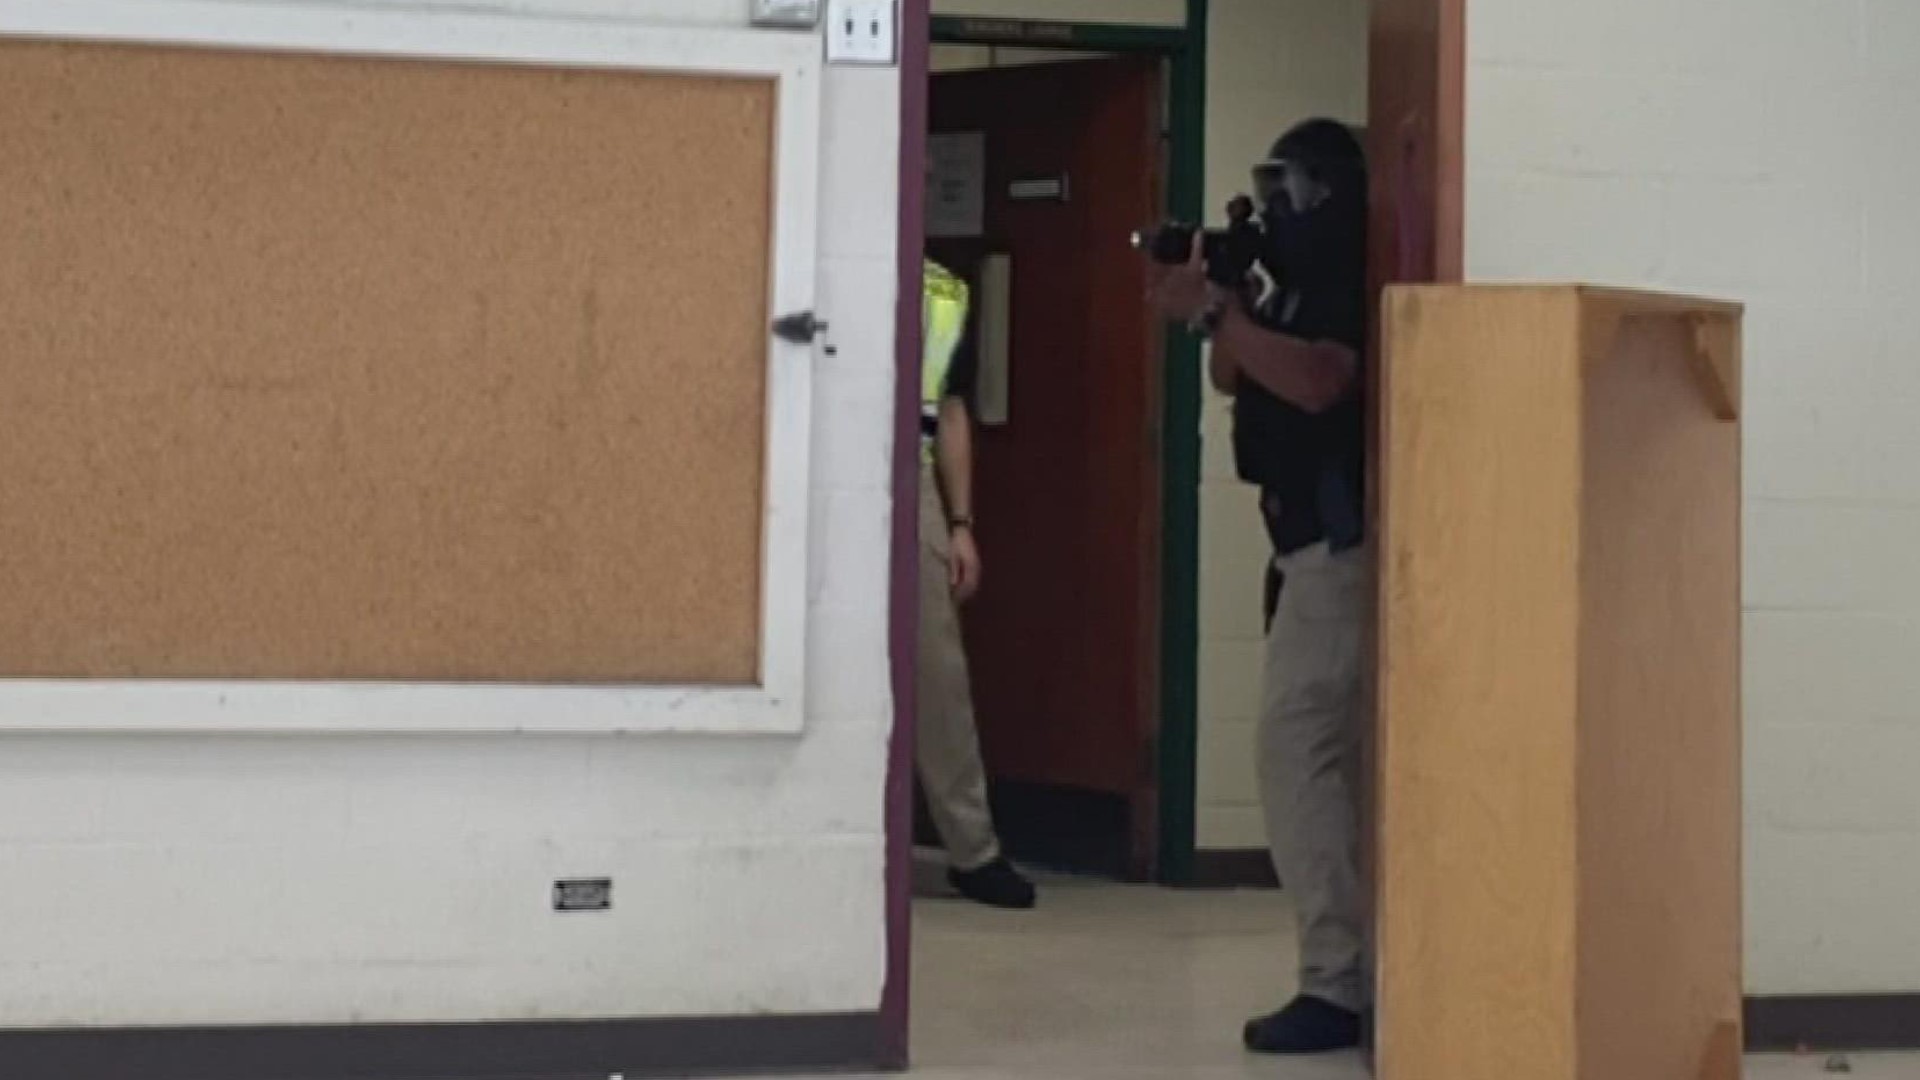 Officers are taught to immediately enter a school.